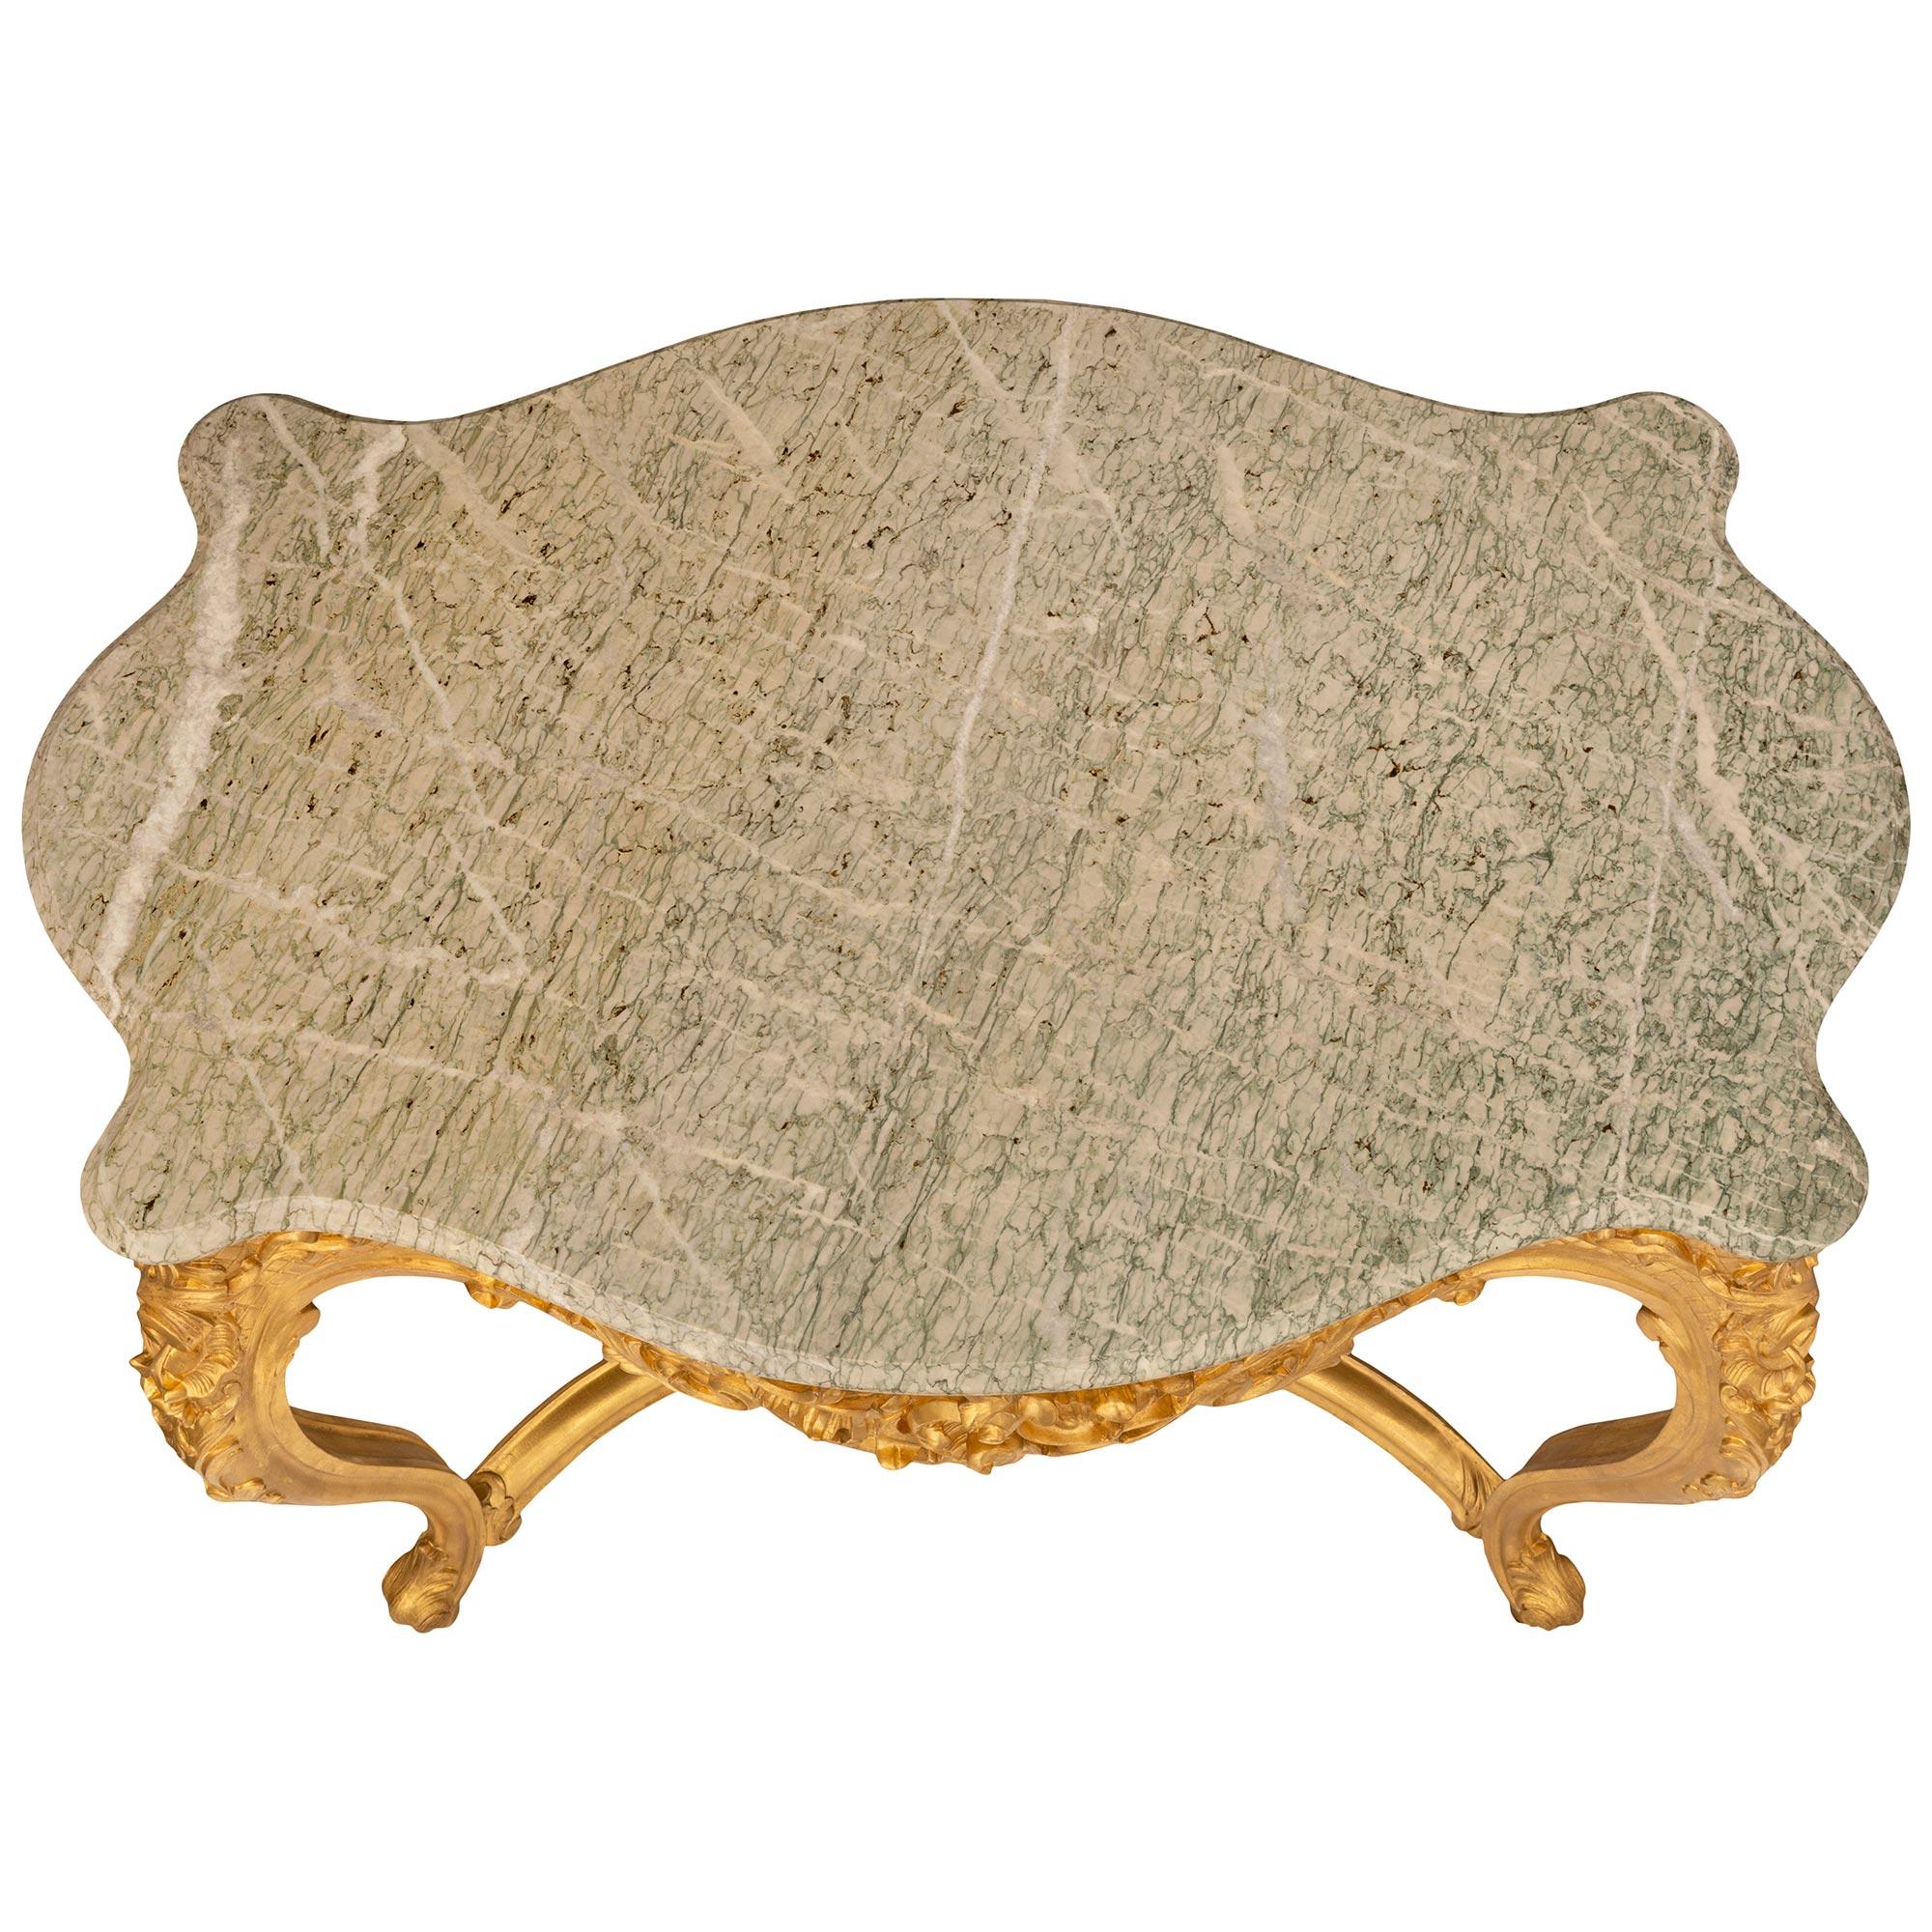 A beautiful and most elegant French 19th century Louis XV st. giltwood and Vert Campan marble center table. The scalloped table is raised by lovely cabriole legs with scrolled acanthus leaf feet connected by an elegantly curved X shaped stretcher